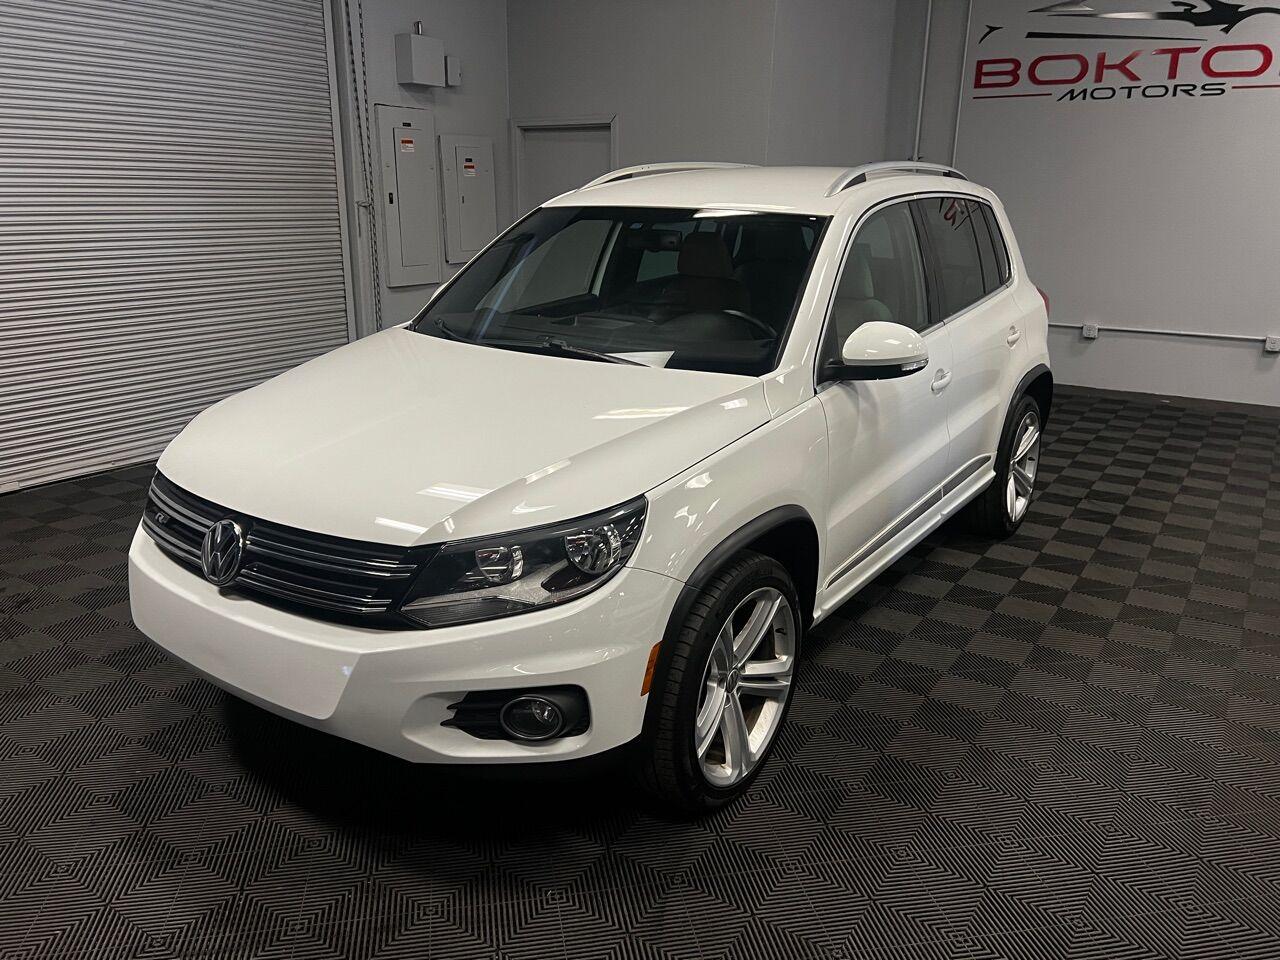 Used 2016 Volkswagen Tiguan 2.0T R Line 4dr SUV For Sale (Sold)